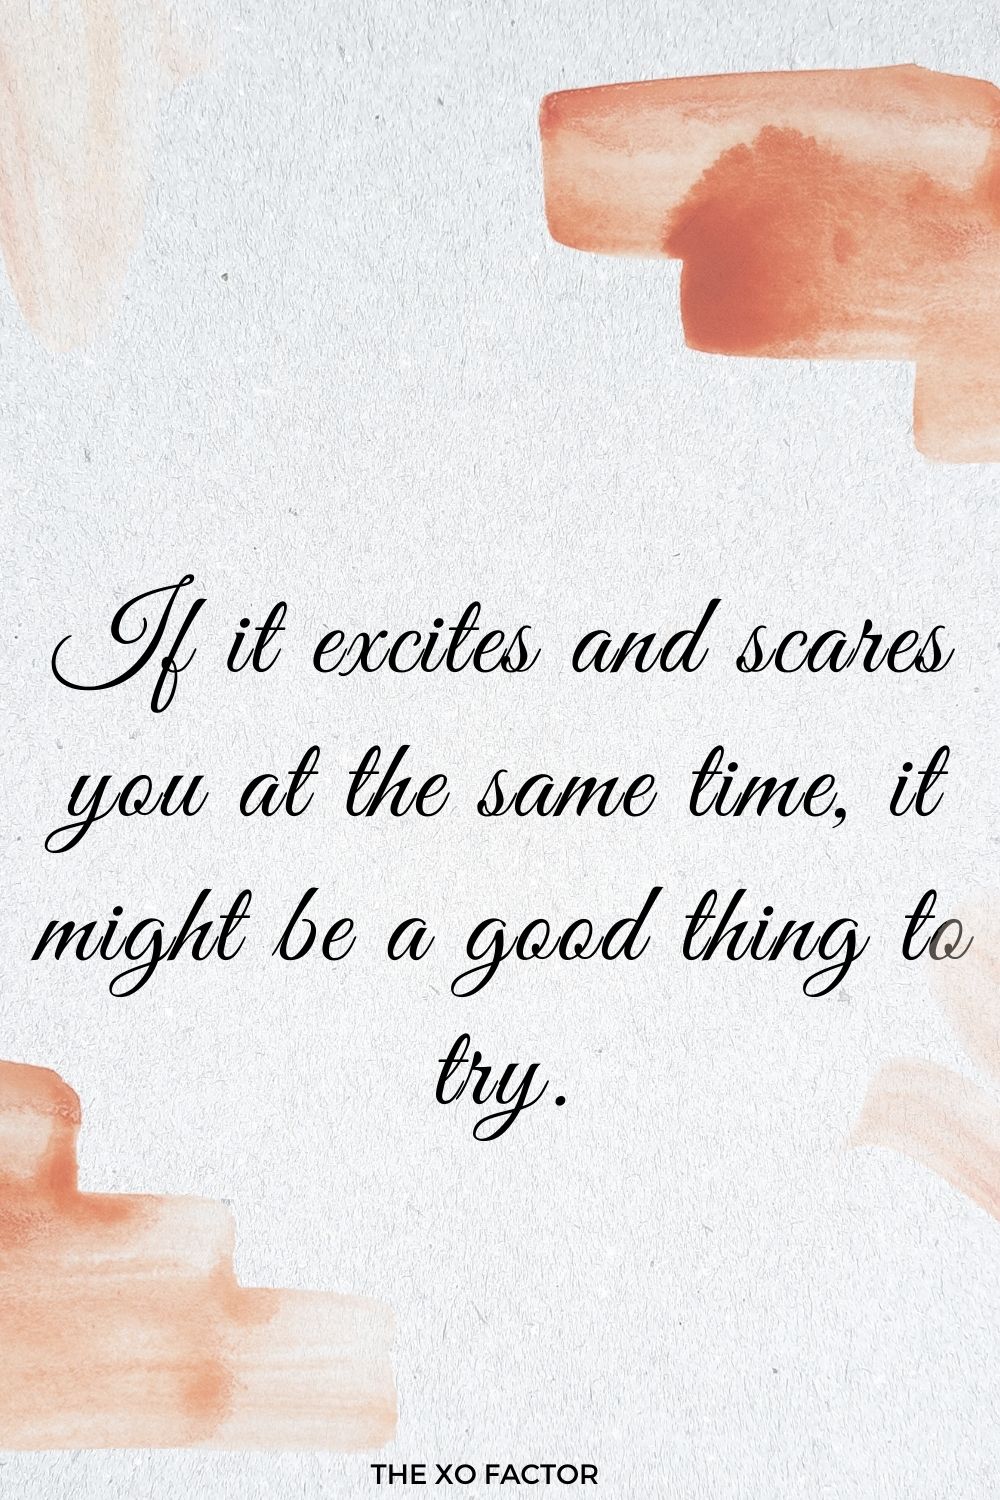 If it excites and scares you at the same time, it might be a good thing to try.